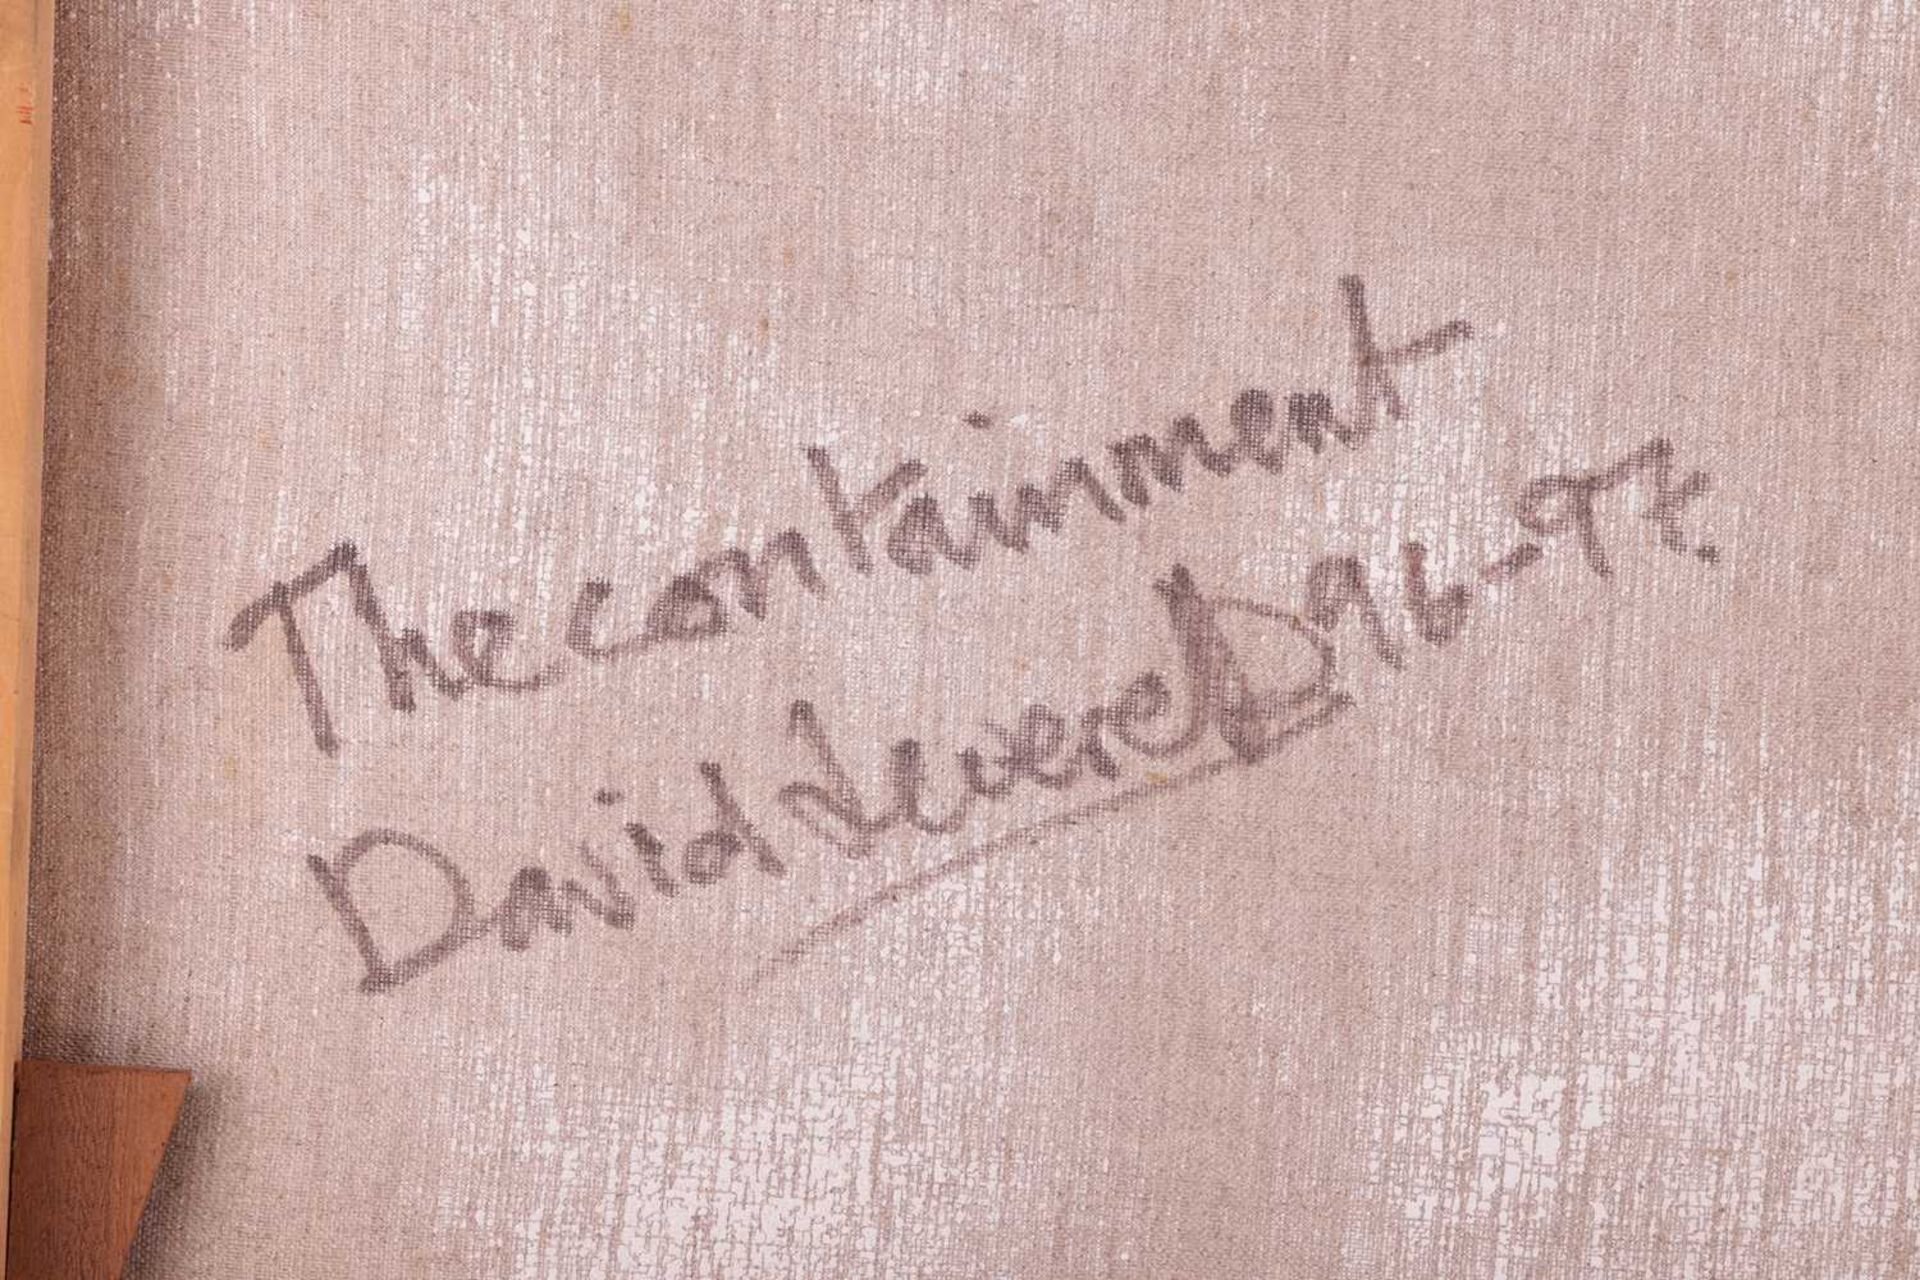 David Leverett (1938 - 2020), 'The Containment', signed dated and titled on the reverse 'David Lever - Bild 4 aus 4